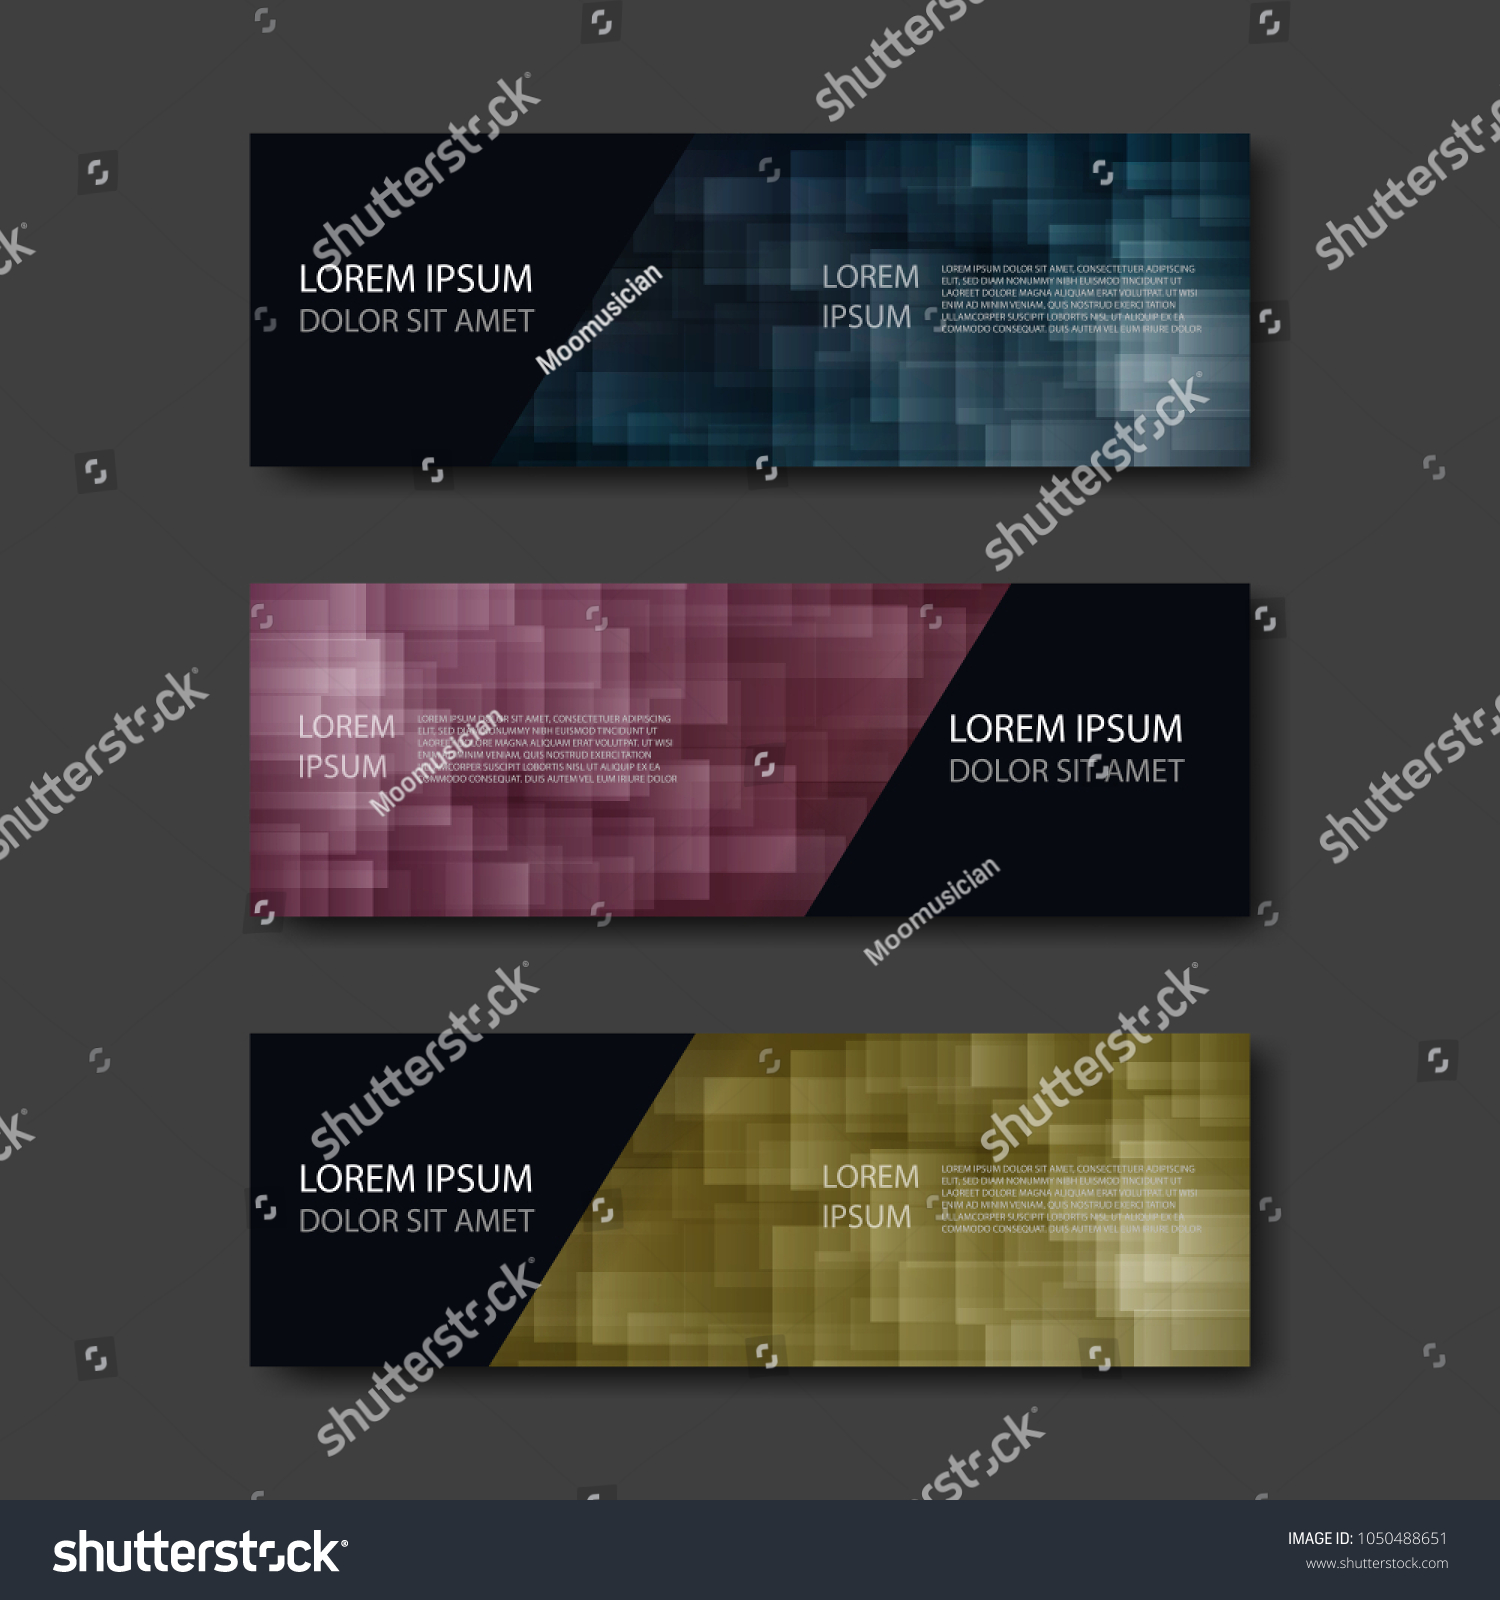 Colorful Banner template. Abstract design vector for website. #1050488651